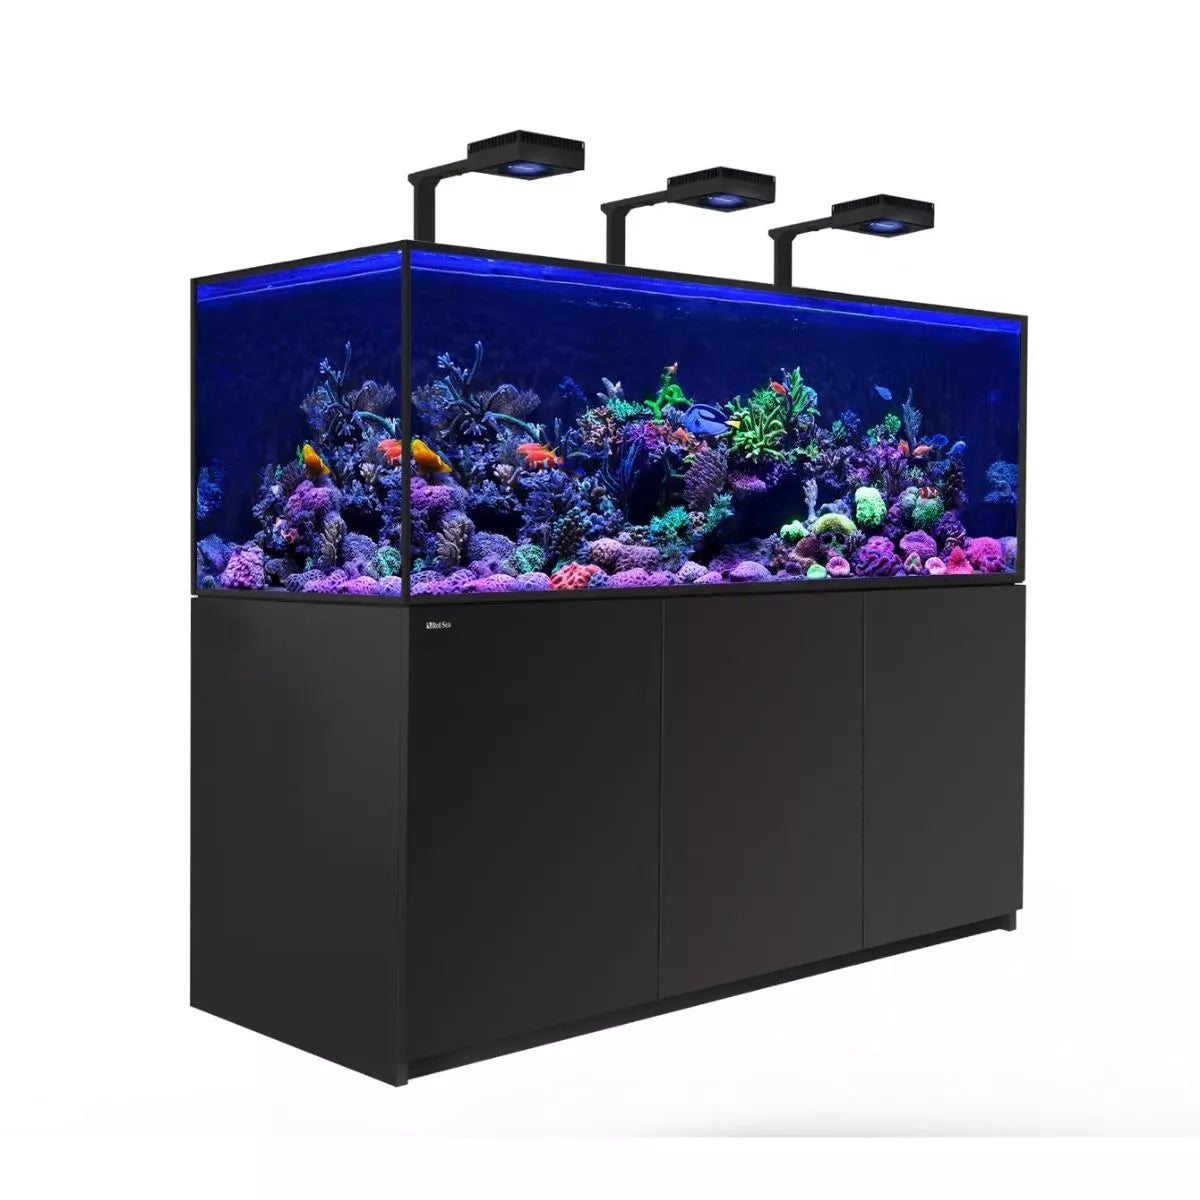 Reefer MAX S-850 G2+ System (180 Gal) - Red Sea